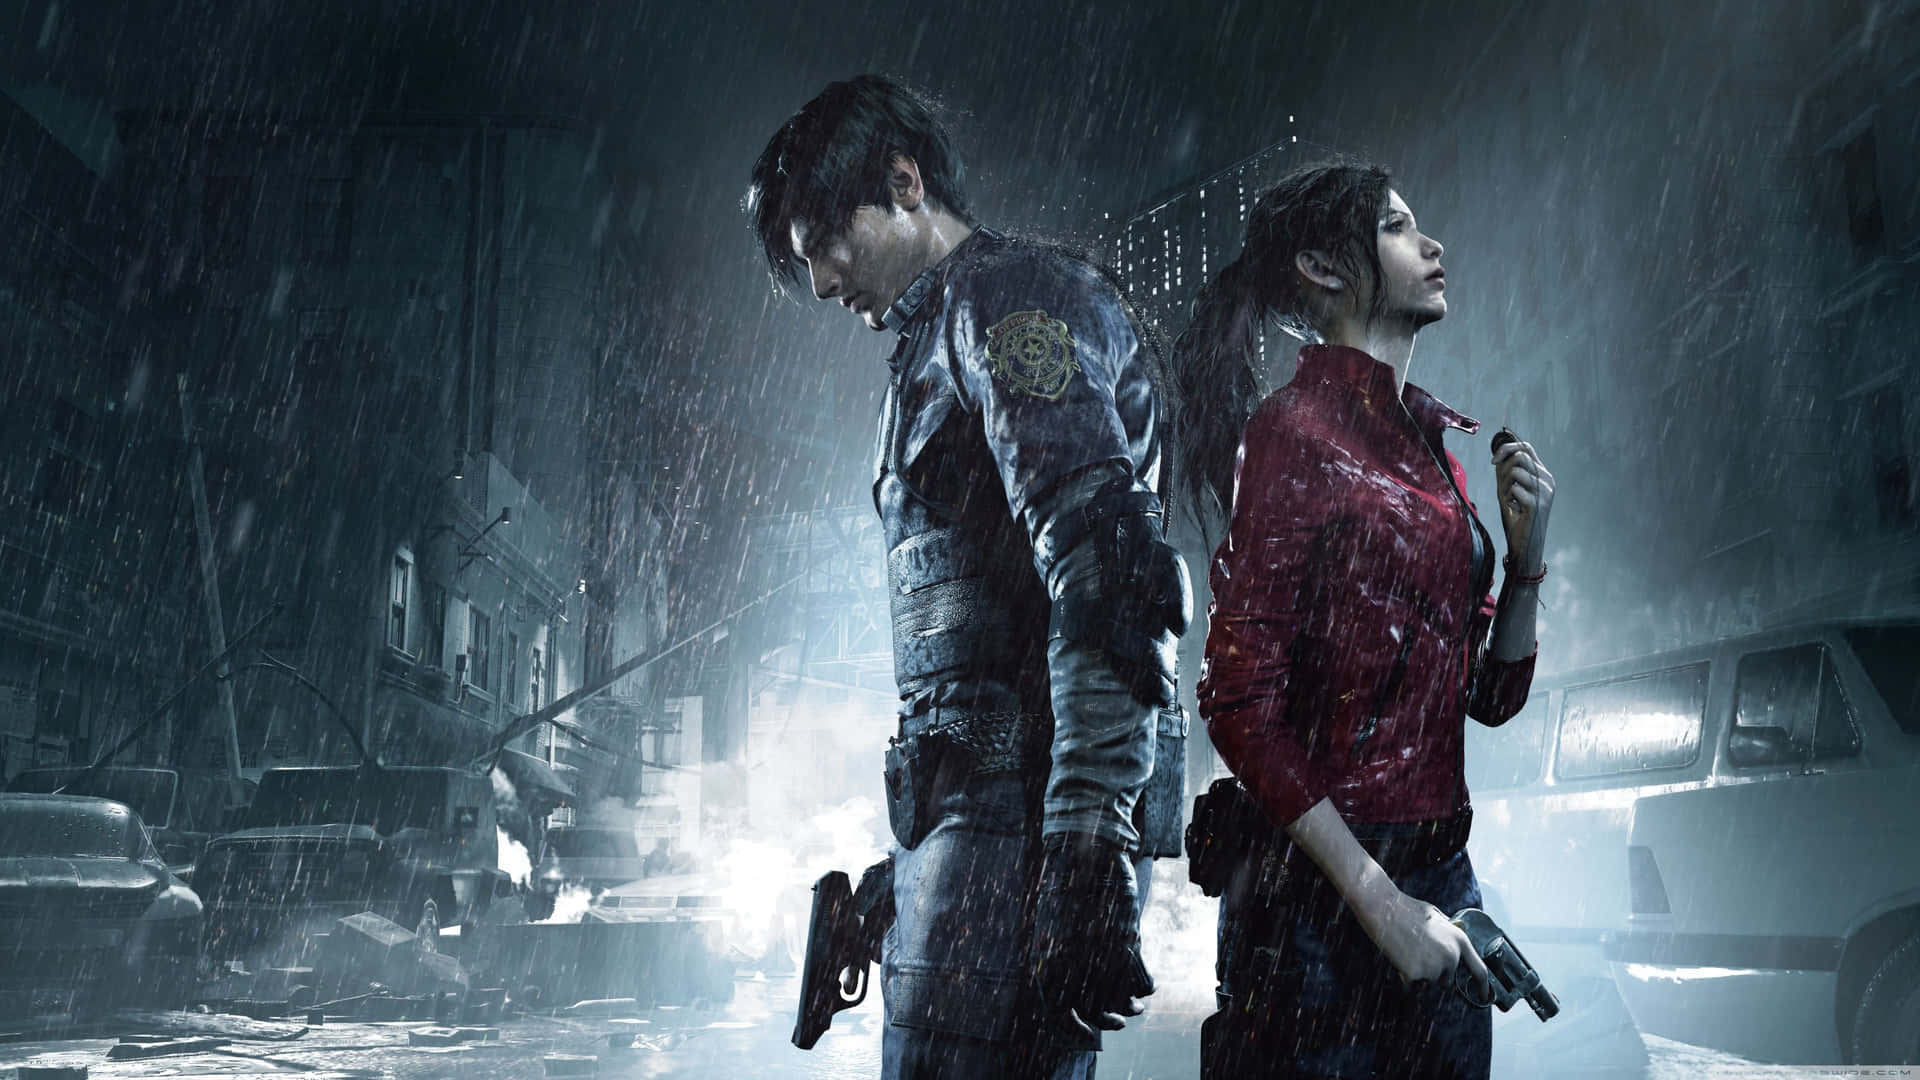 Intense action in the thrilling world of Resident Evil